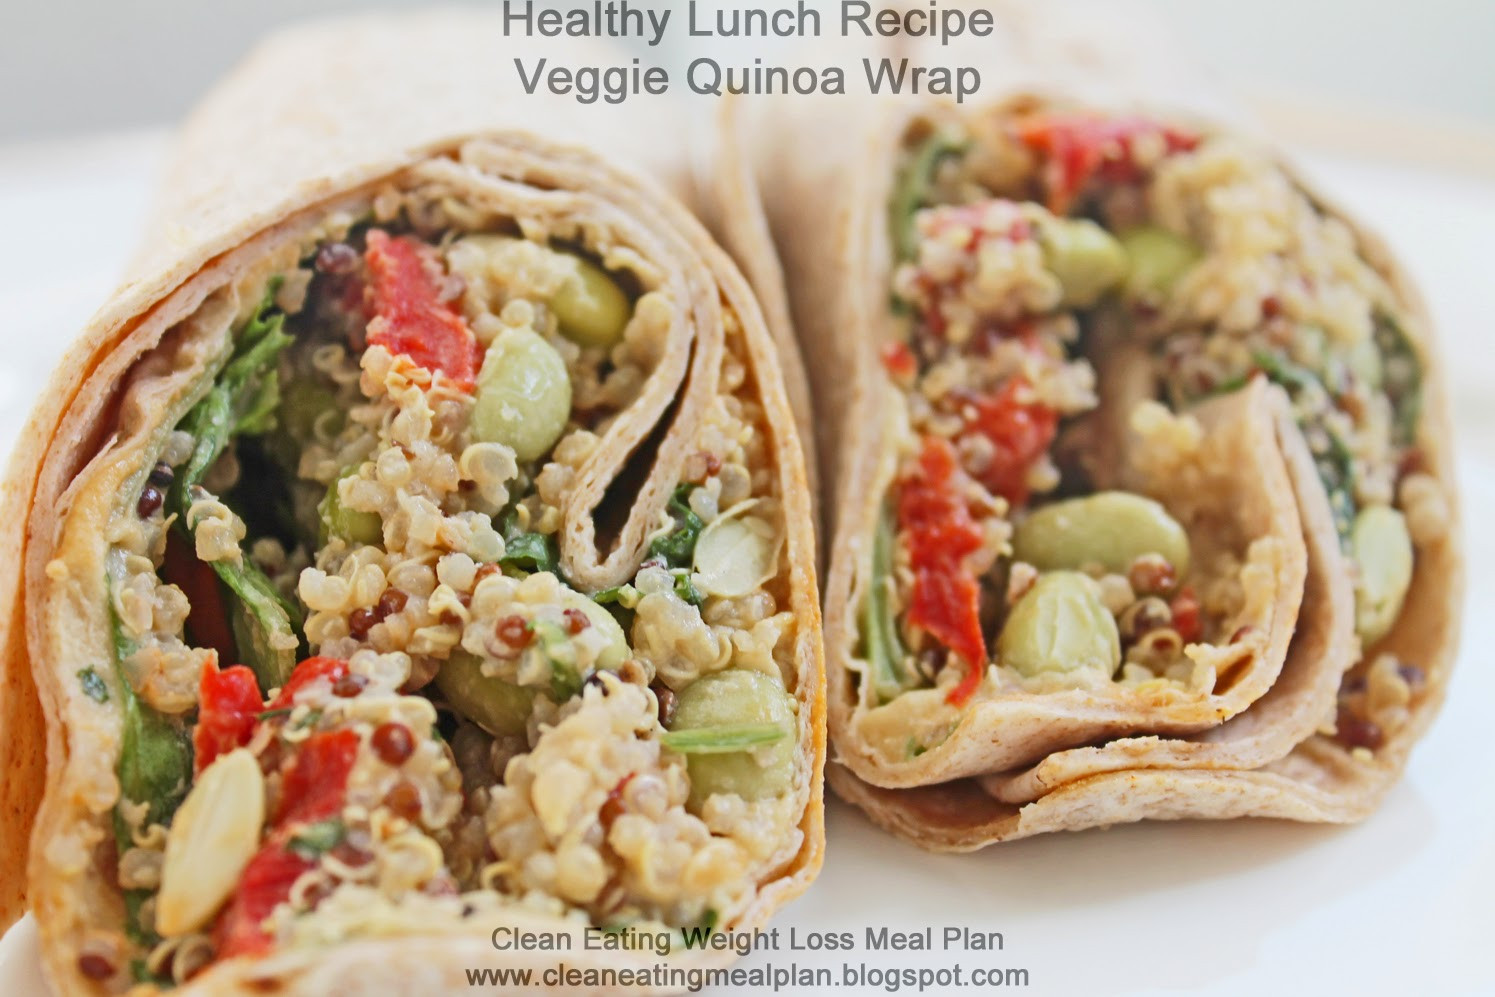 Healthy Recipes For Weight Loss
 Best Diet Plans Healthy Lunch Recipe for Weight Loss Meal